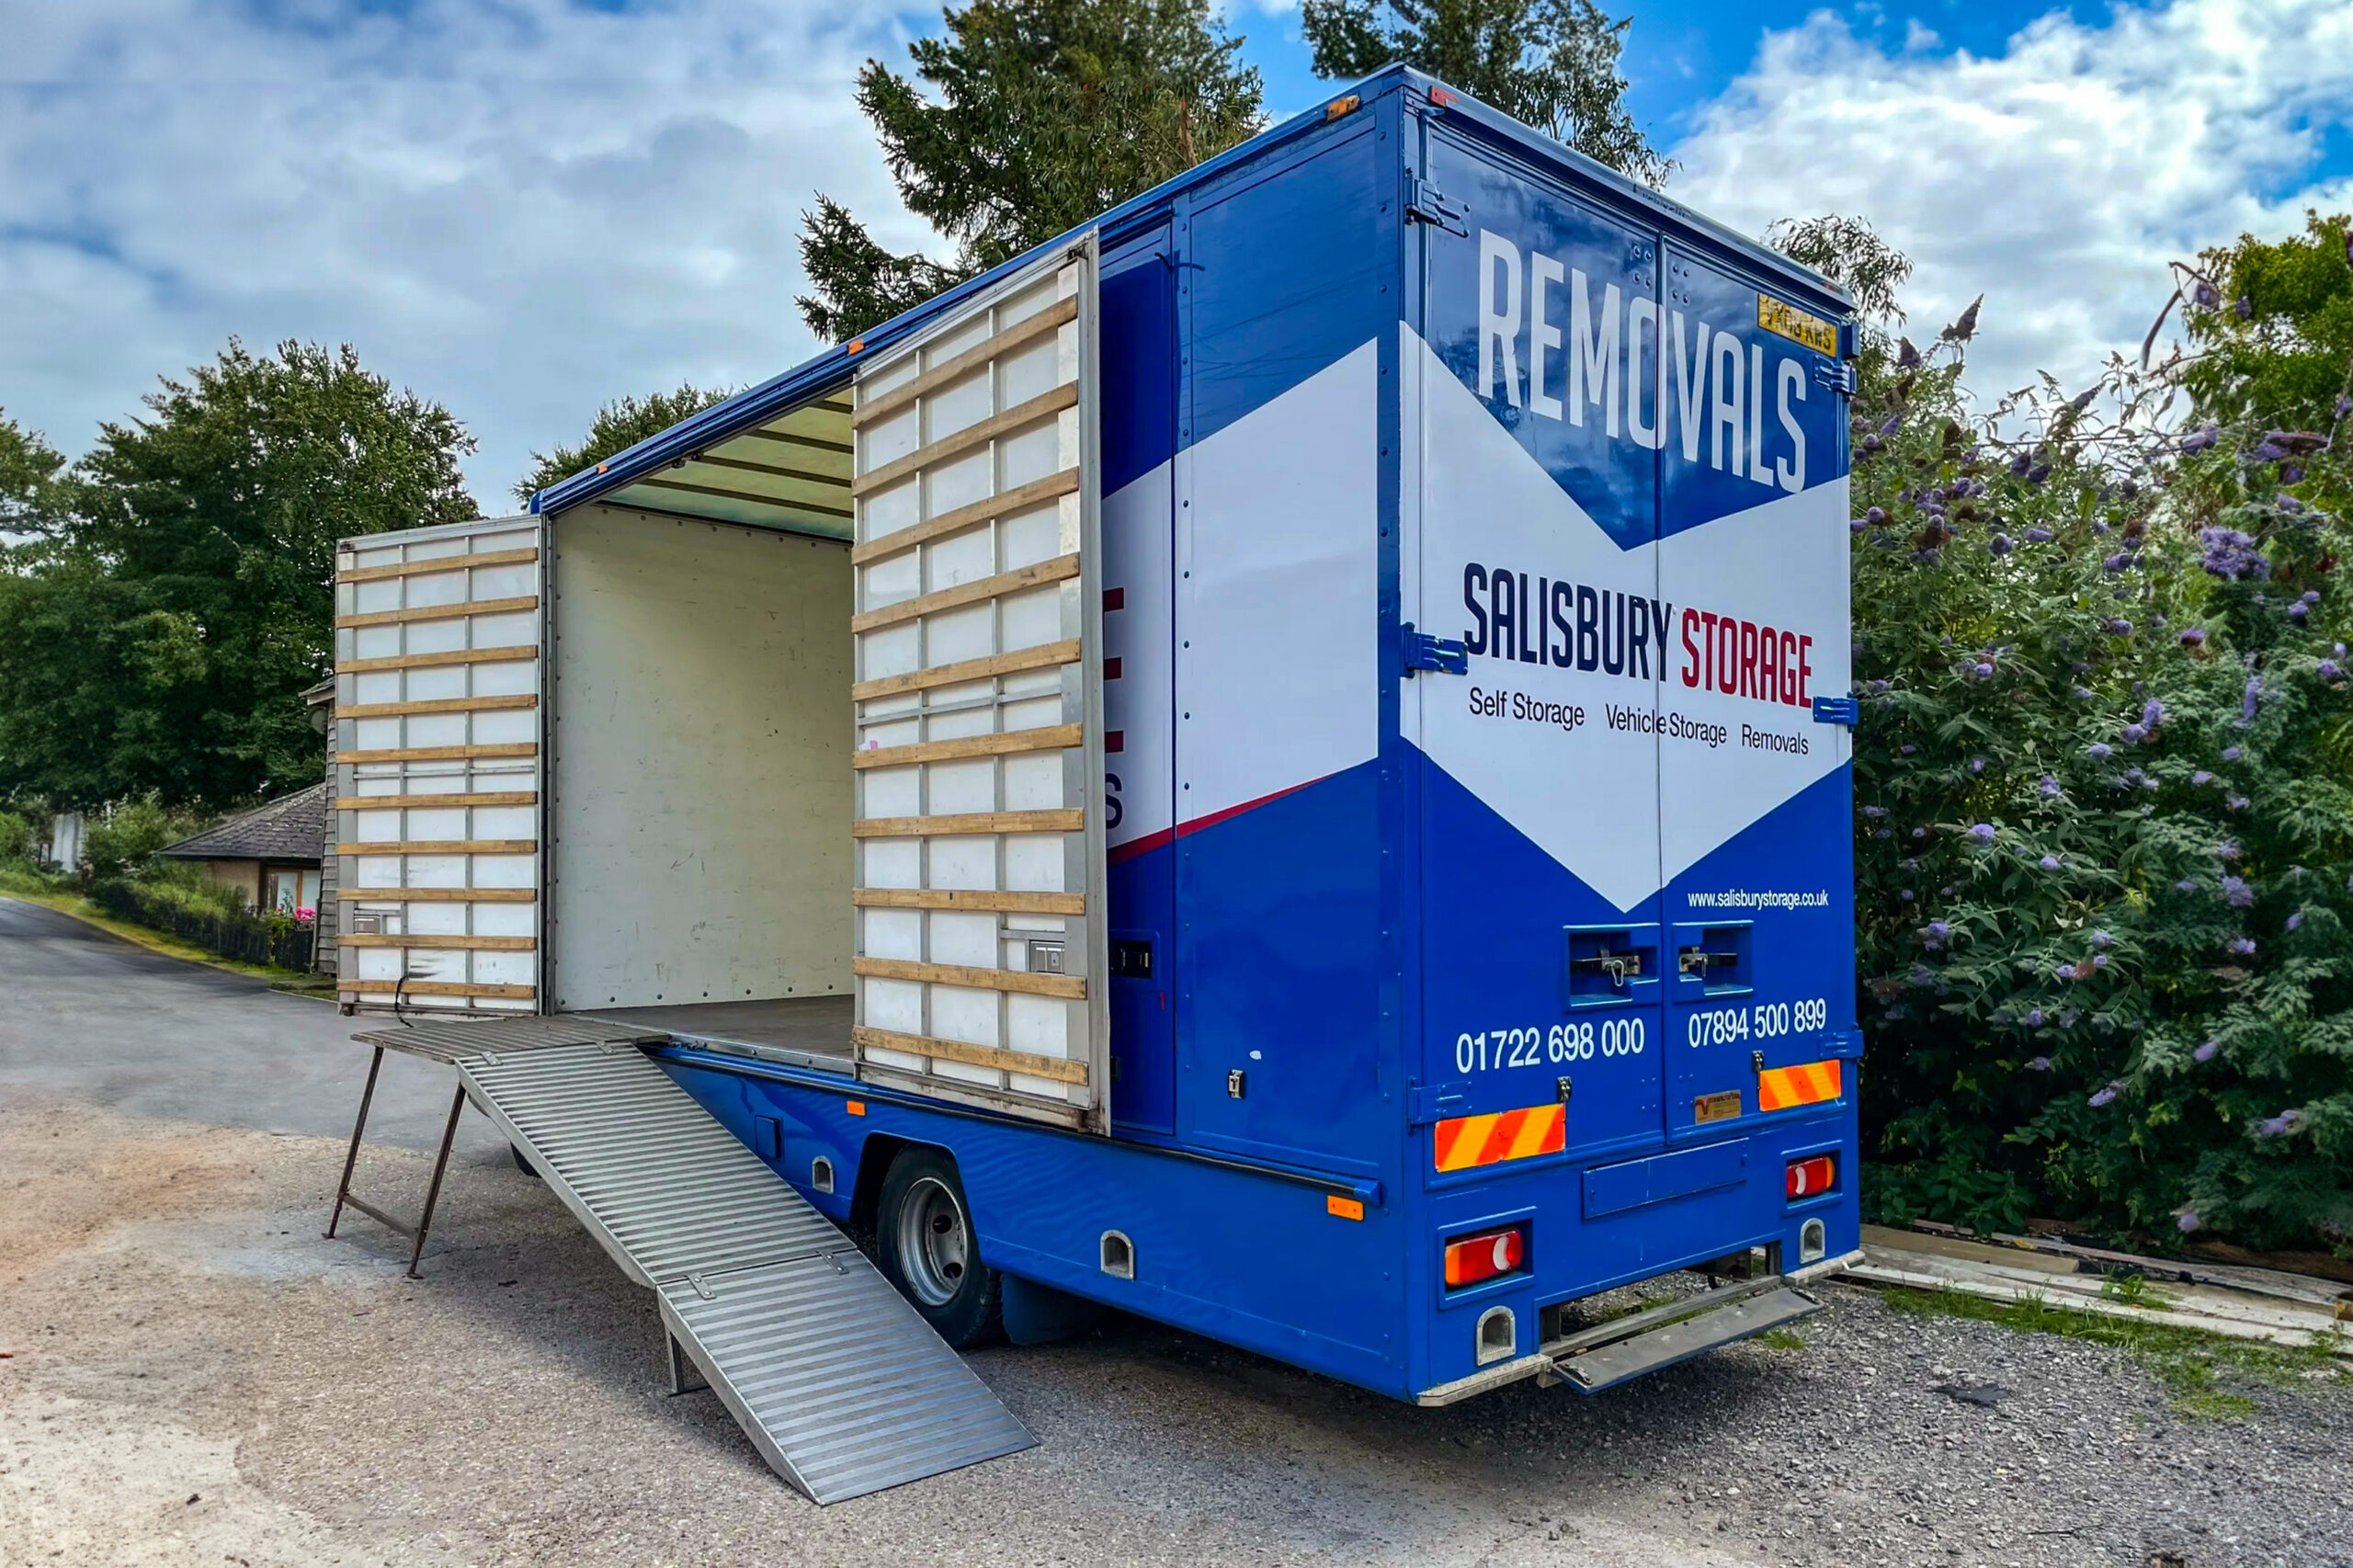 A large blue storage and removal lorry with a ramp attached and side doors opened, ready to transport belongings efficiently.